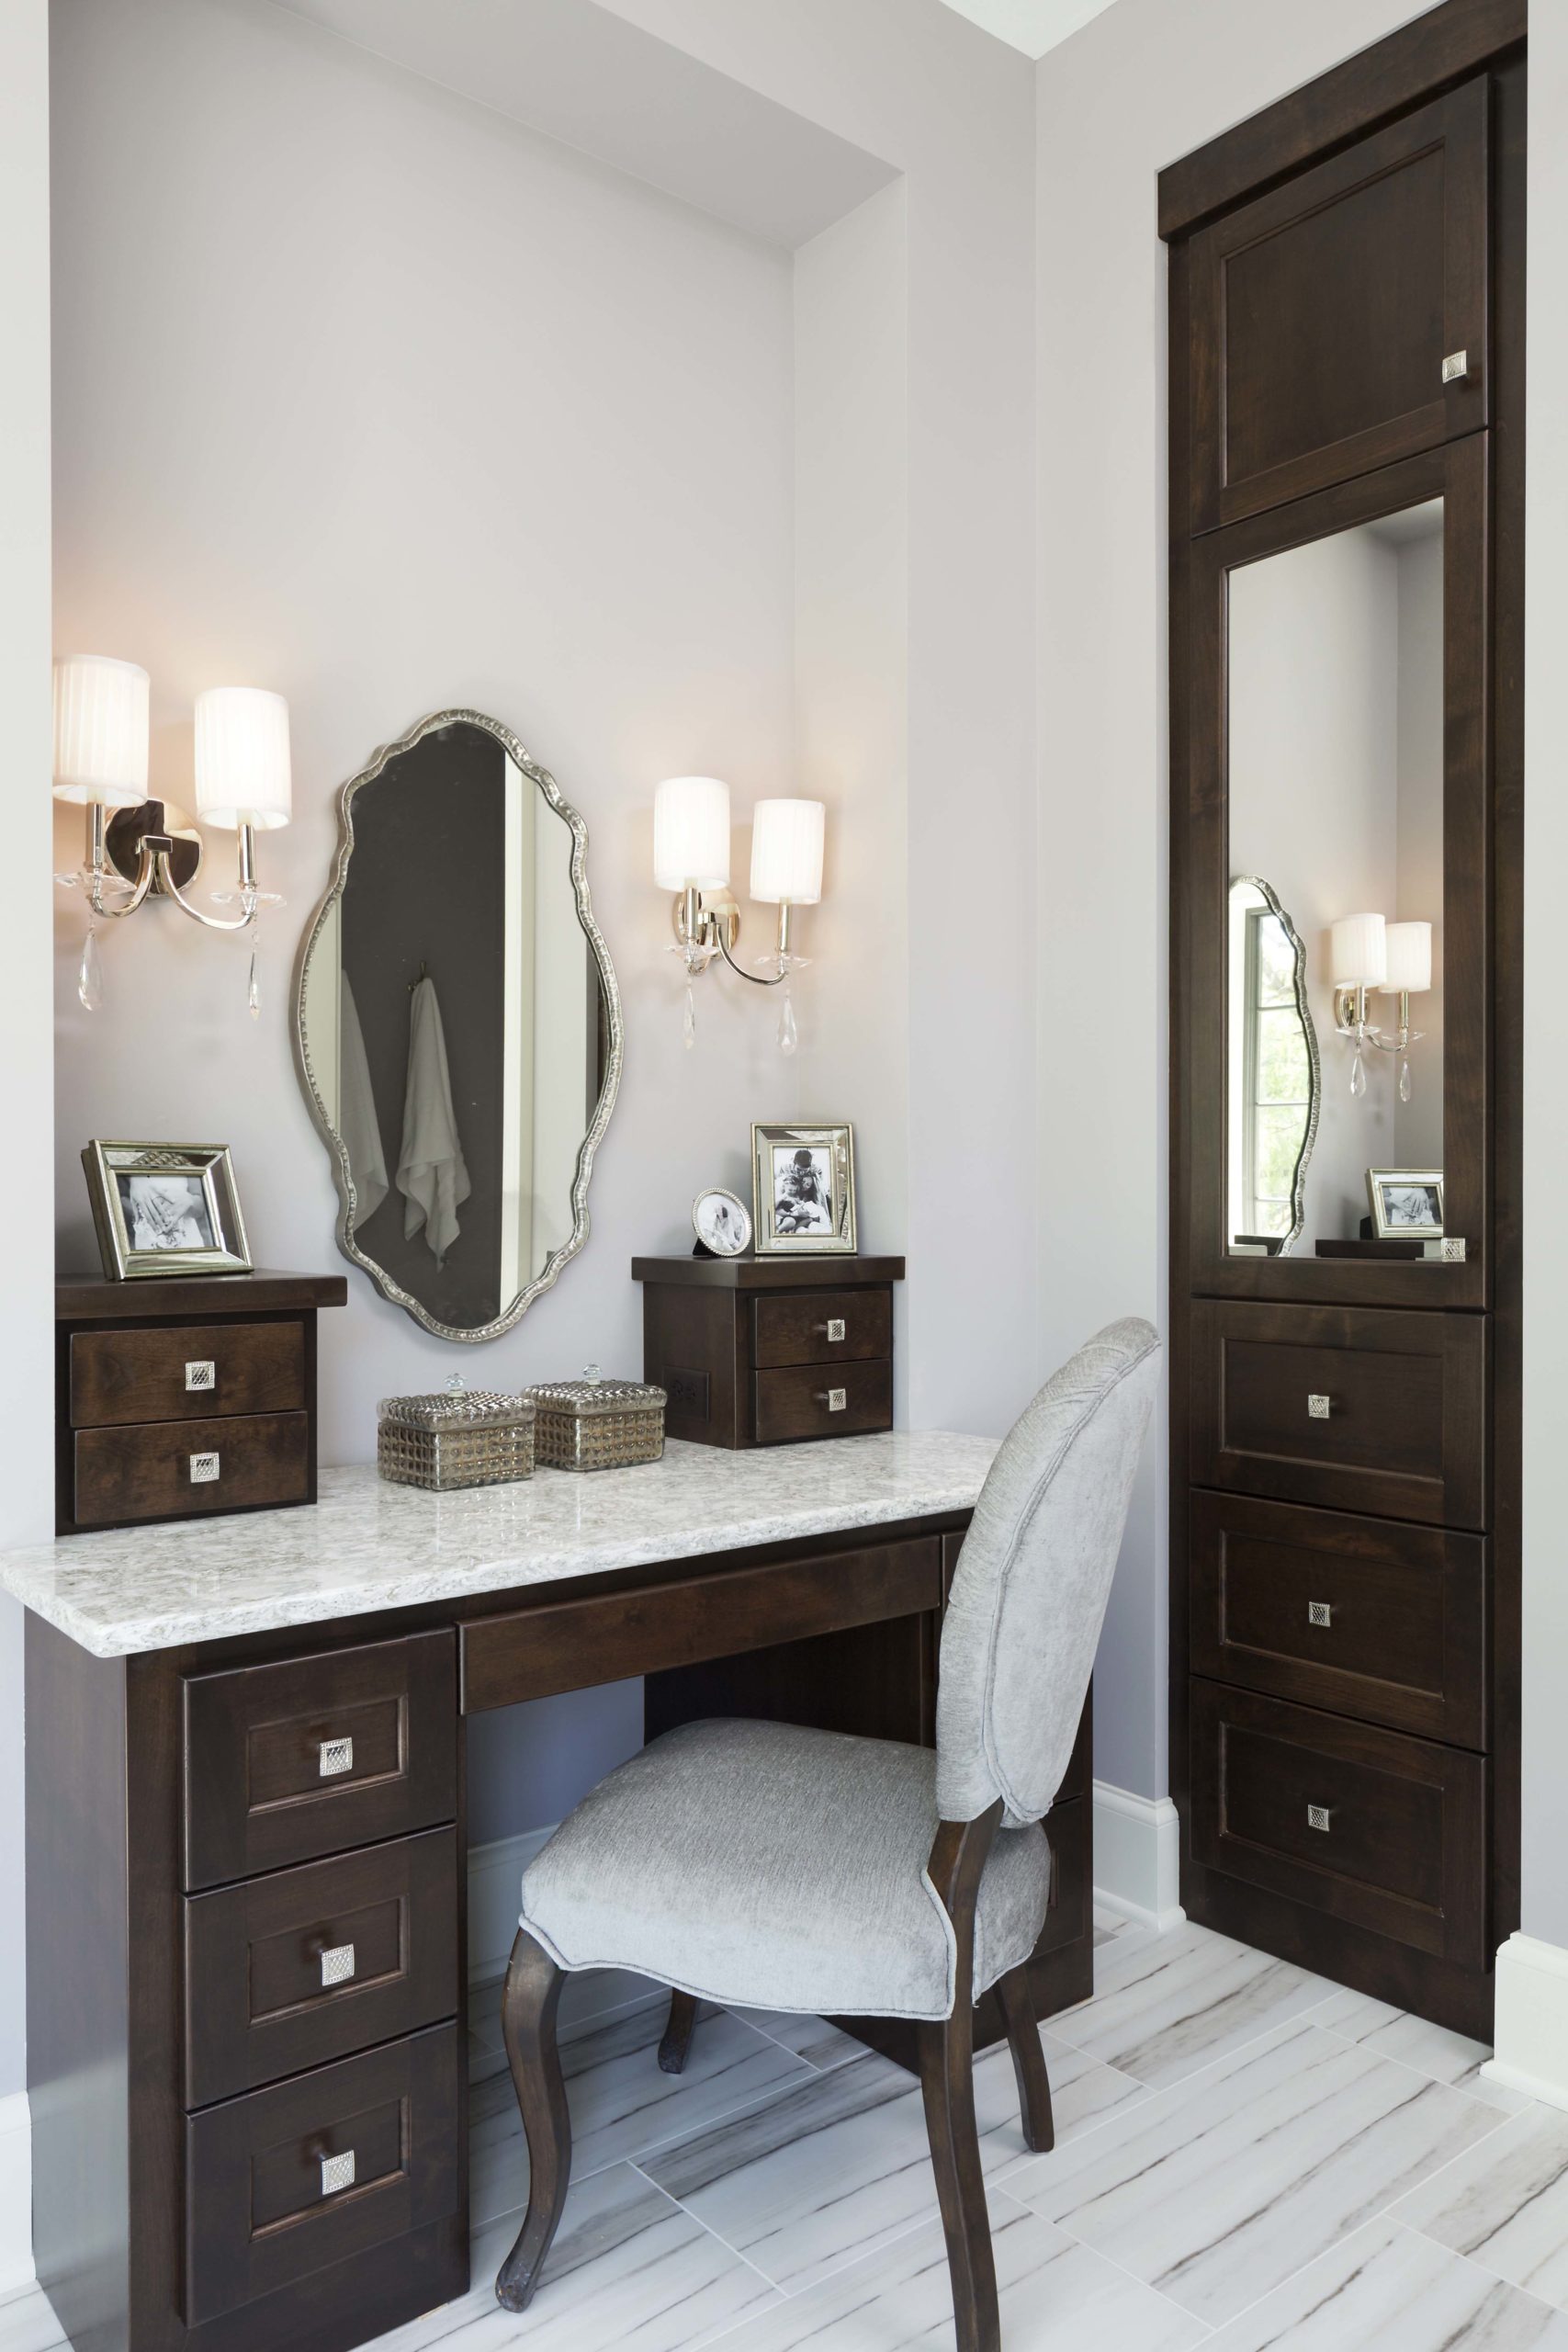 A bathroom with a vanity, mirror, and chair.